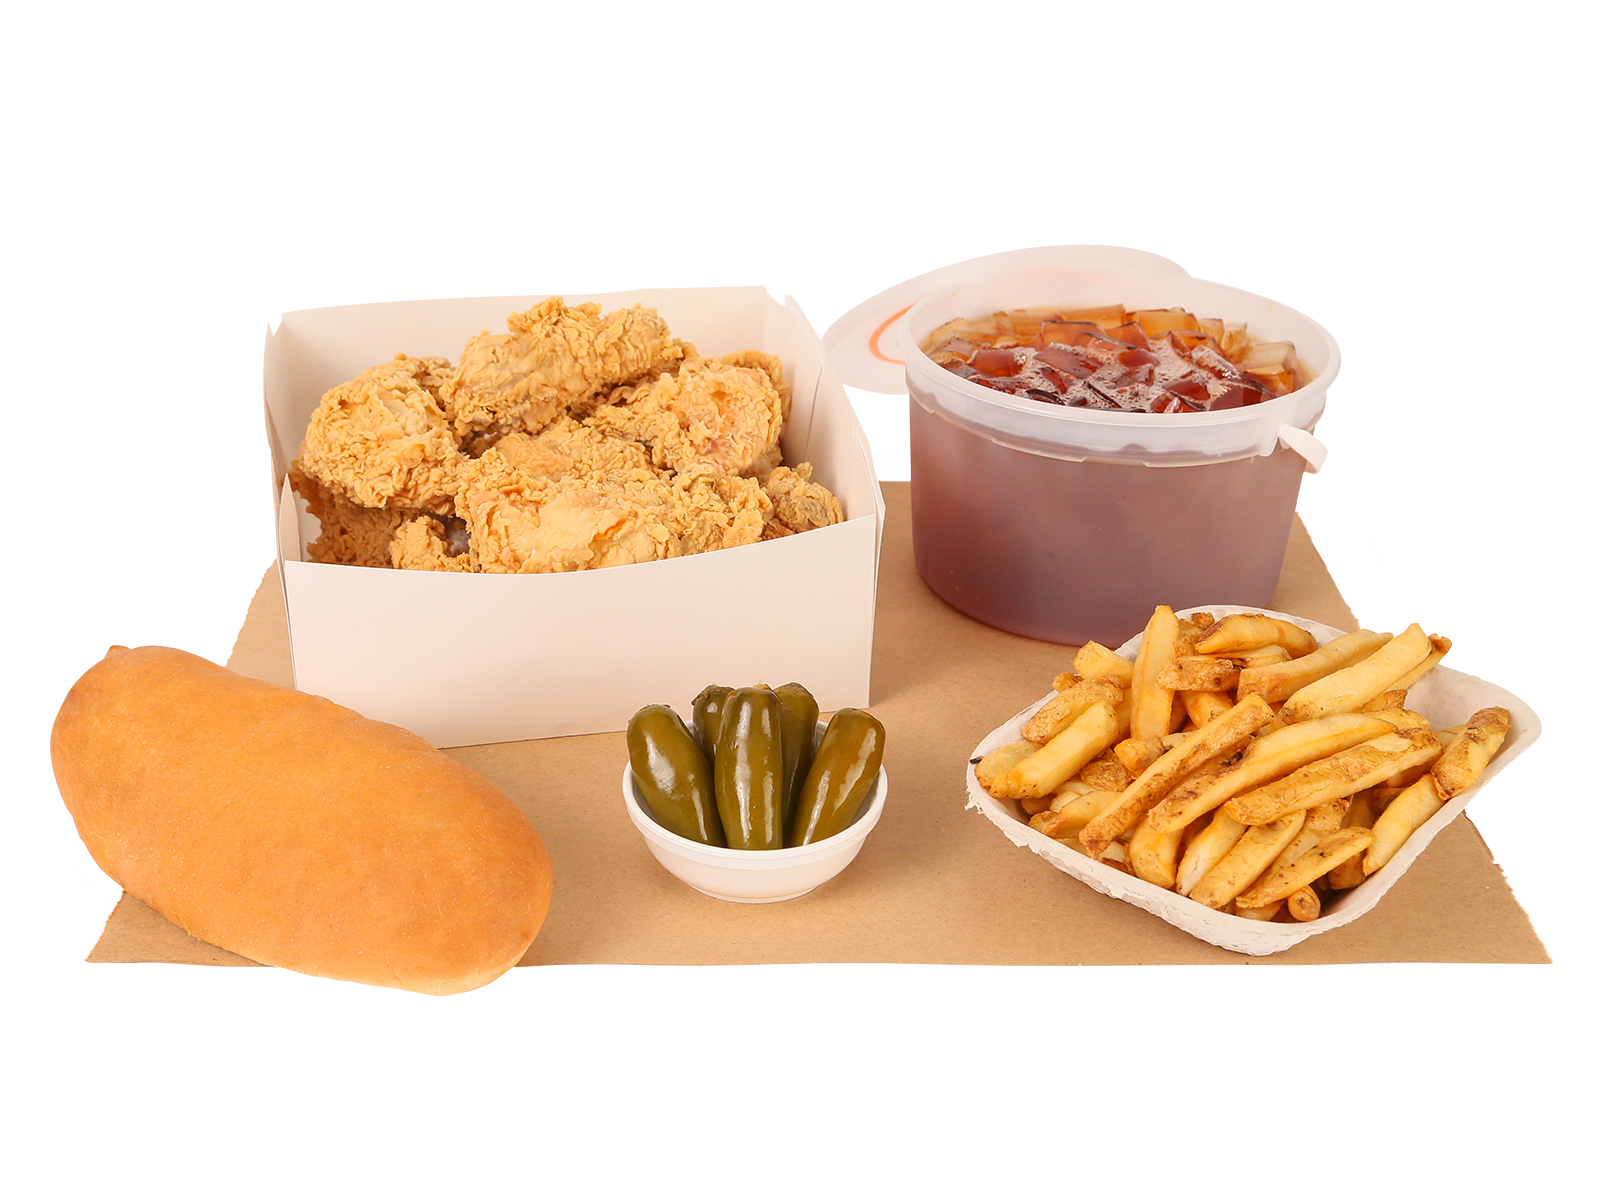 10 PC. Fried Chicken served with french fries, five jalapenos, french loaf, & bucket of tea